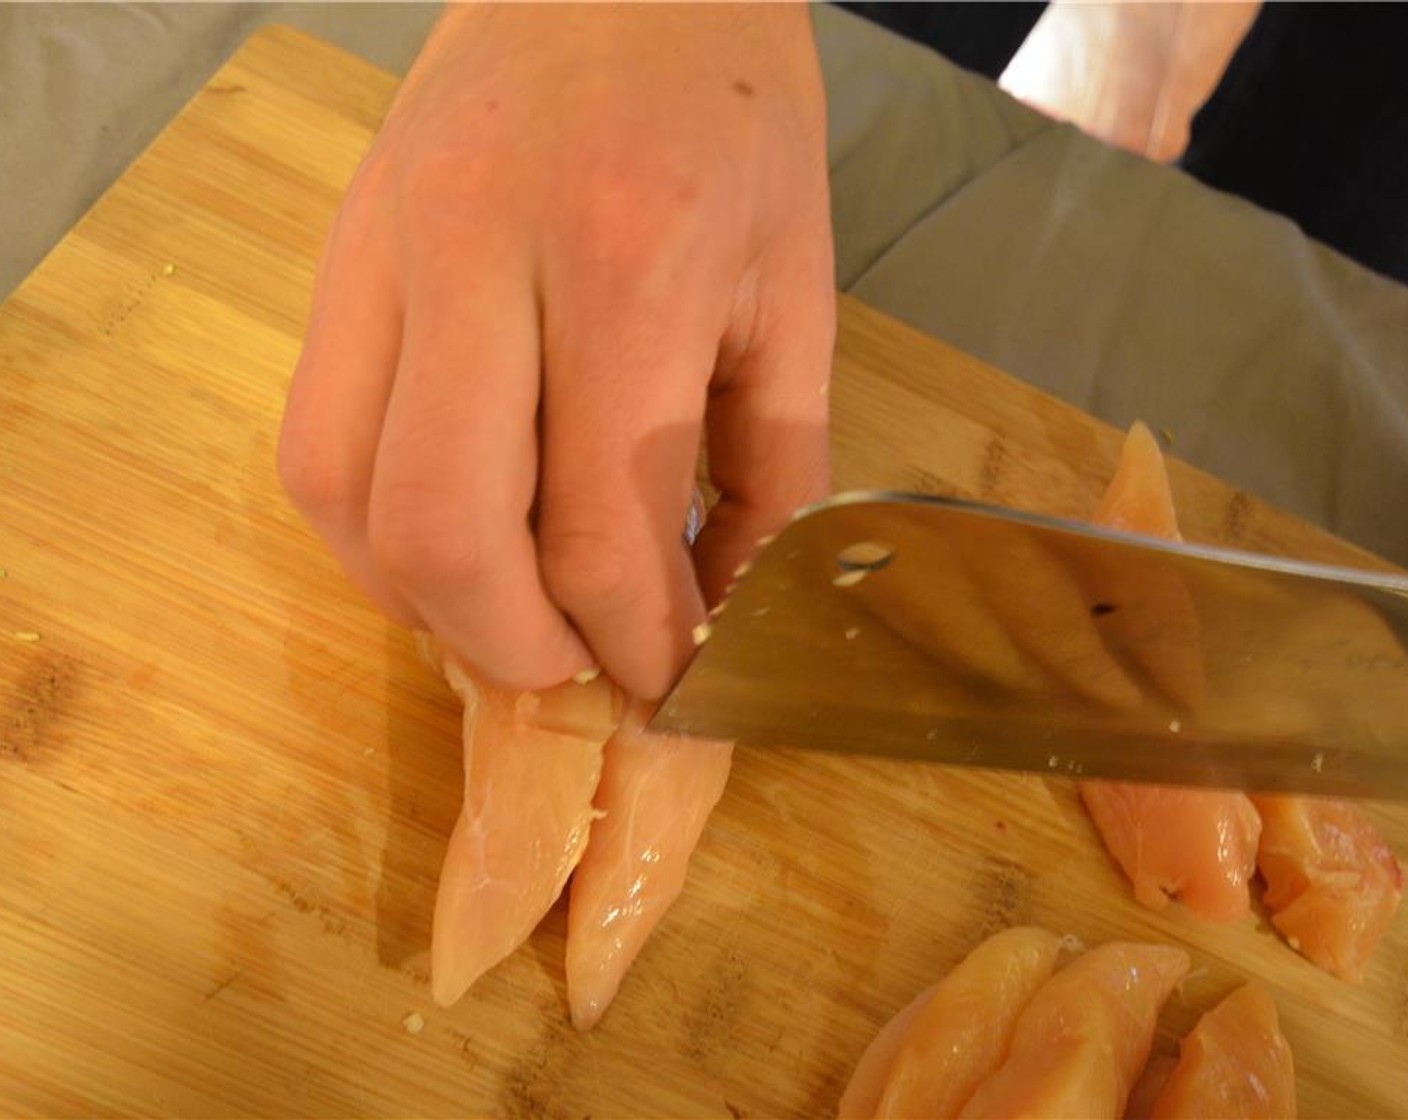 step 3 Make parallel, shallow cuts in to the Chicken Tenders (1 lb). This allows the meat to absorb the marinade better.